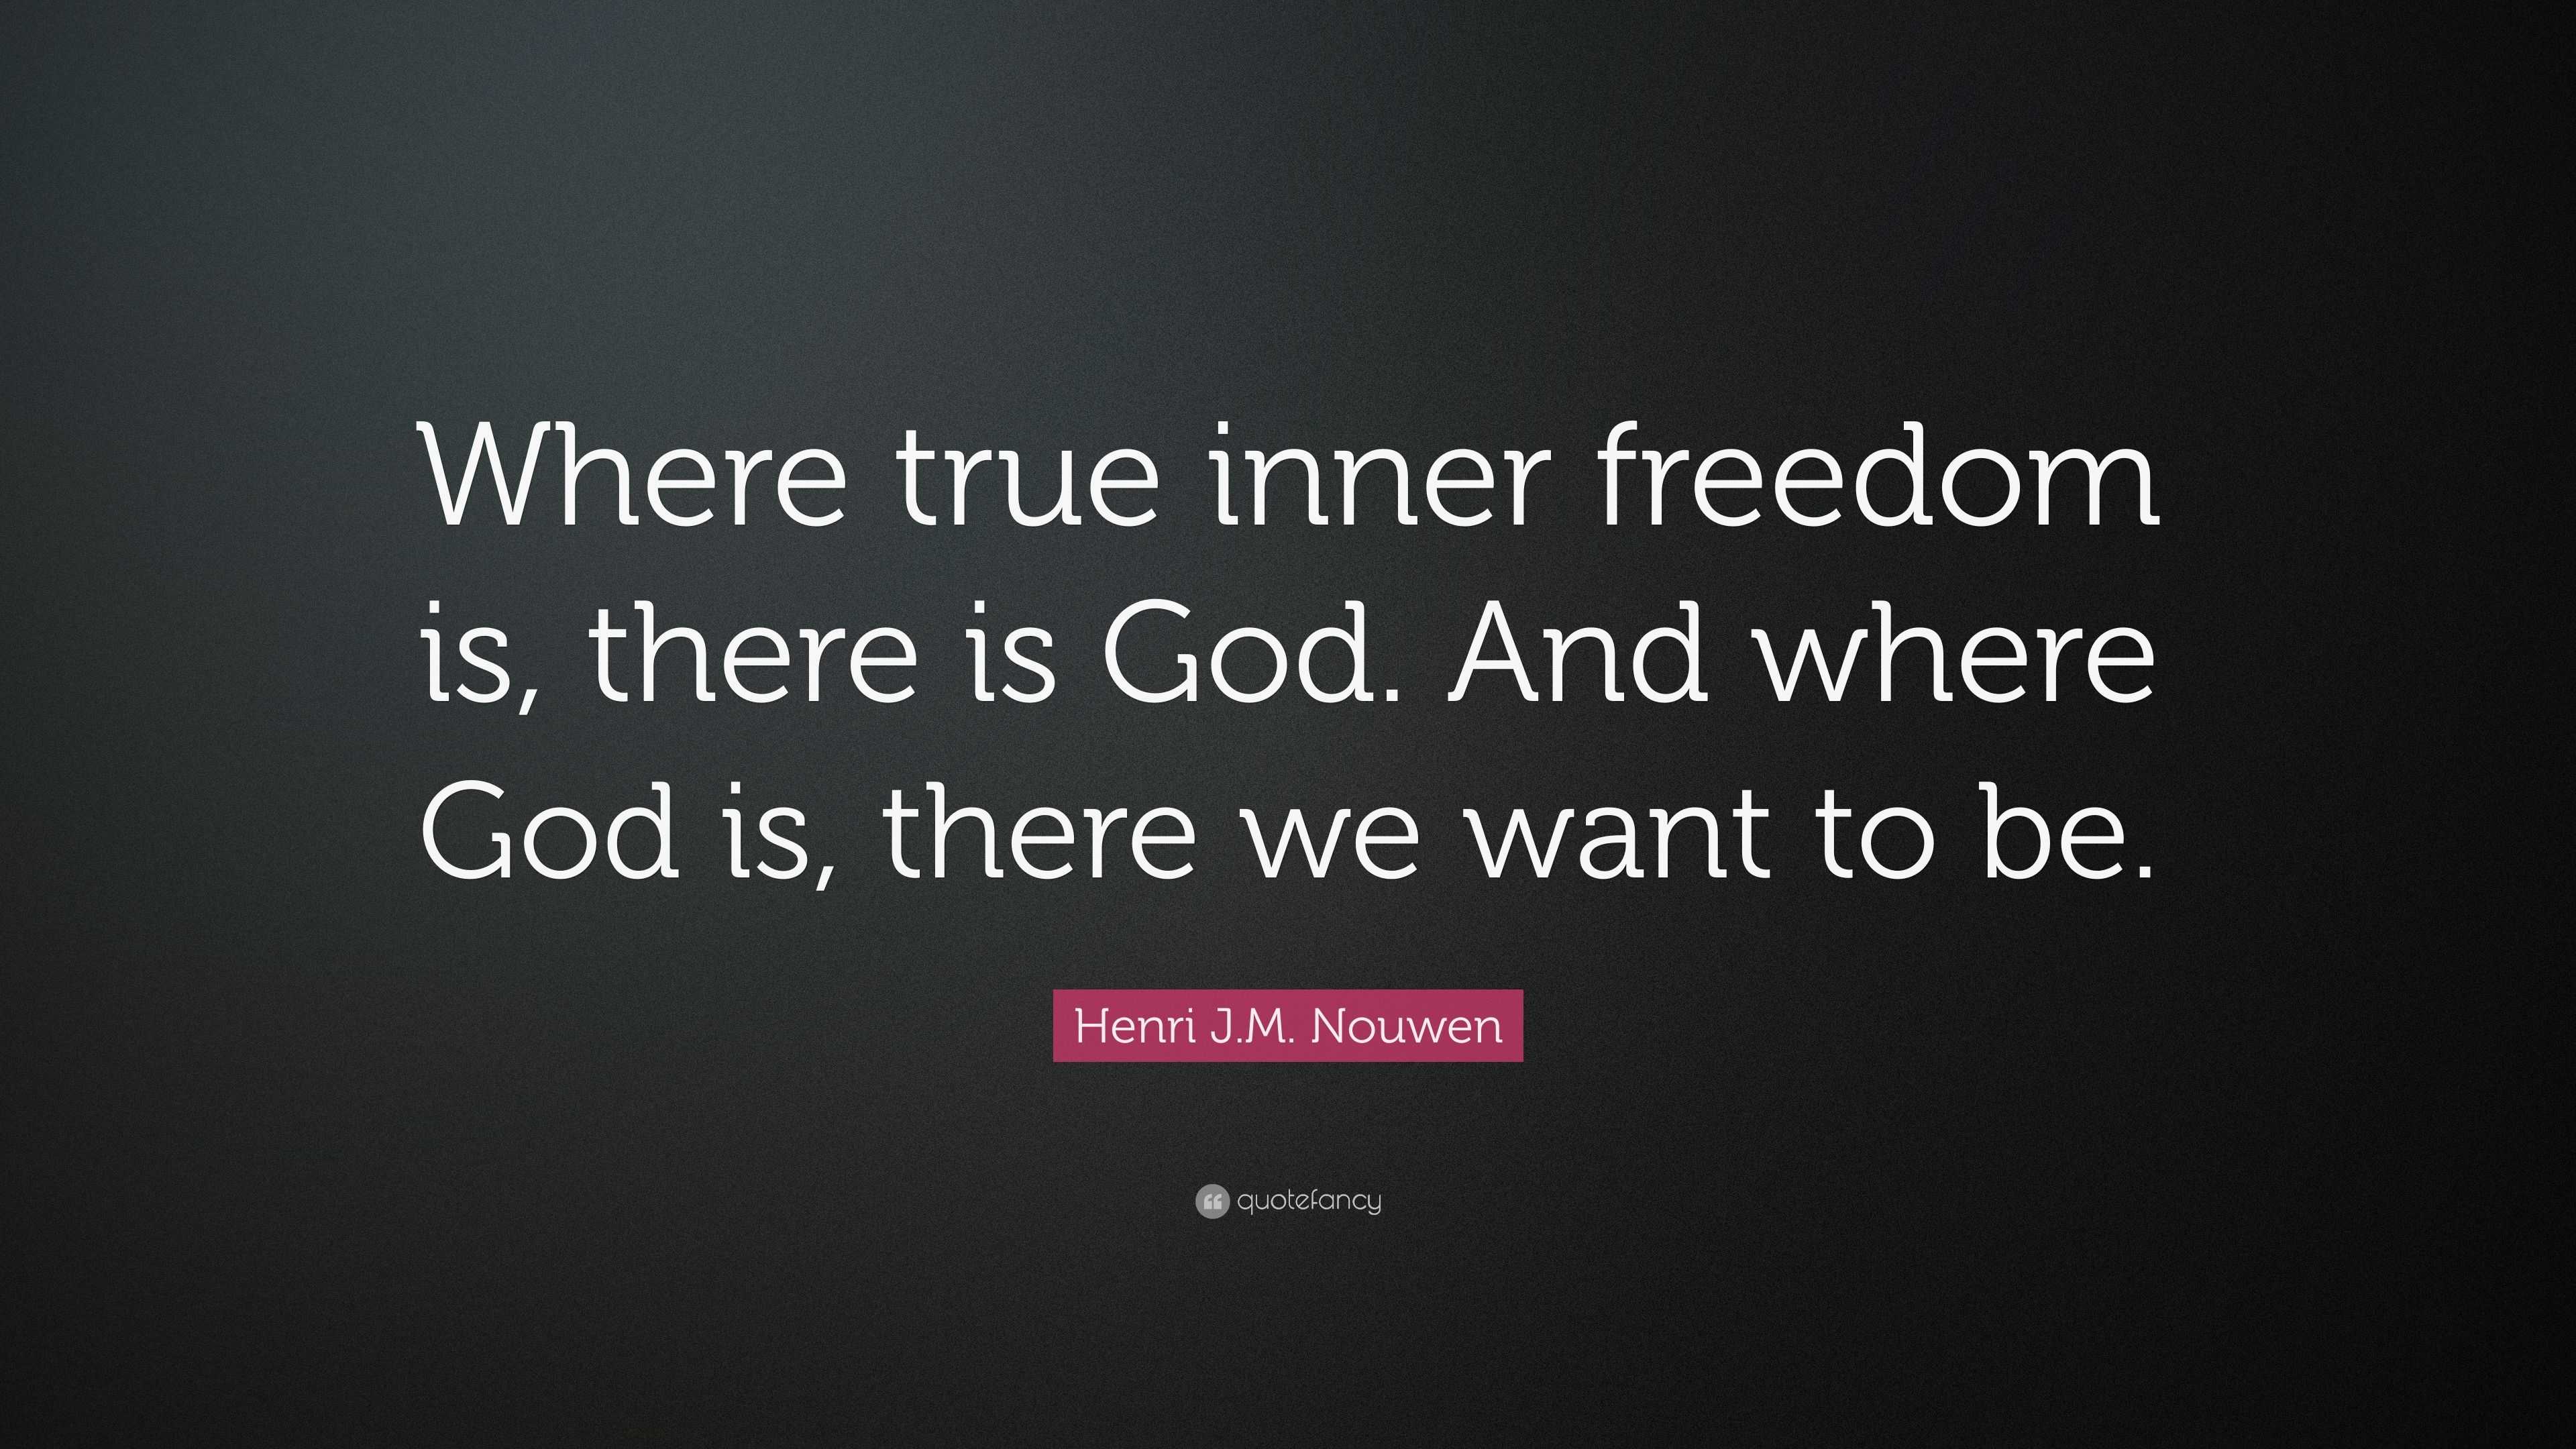 Henri J.M. Nouwen Quote: “Where true inner freedom is, there is God ...